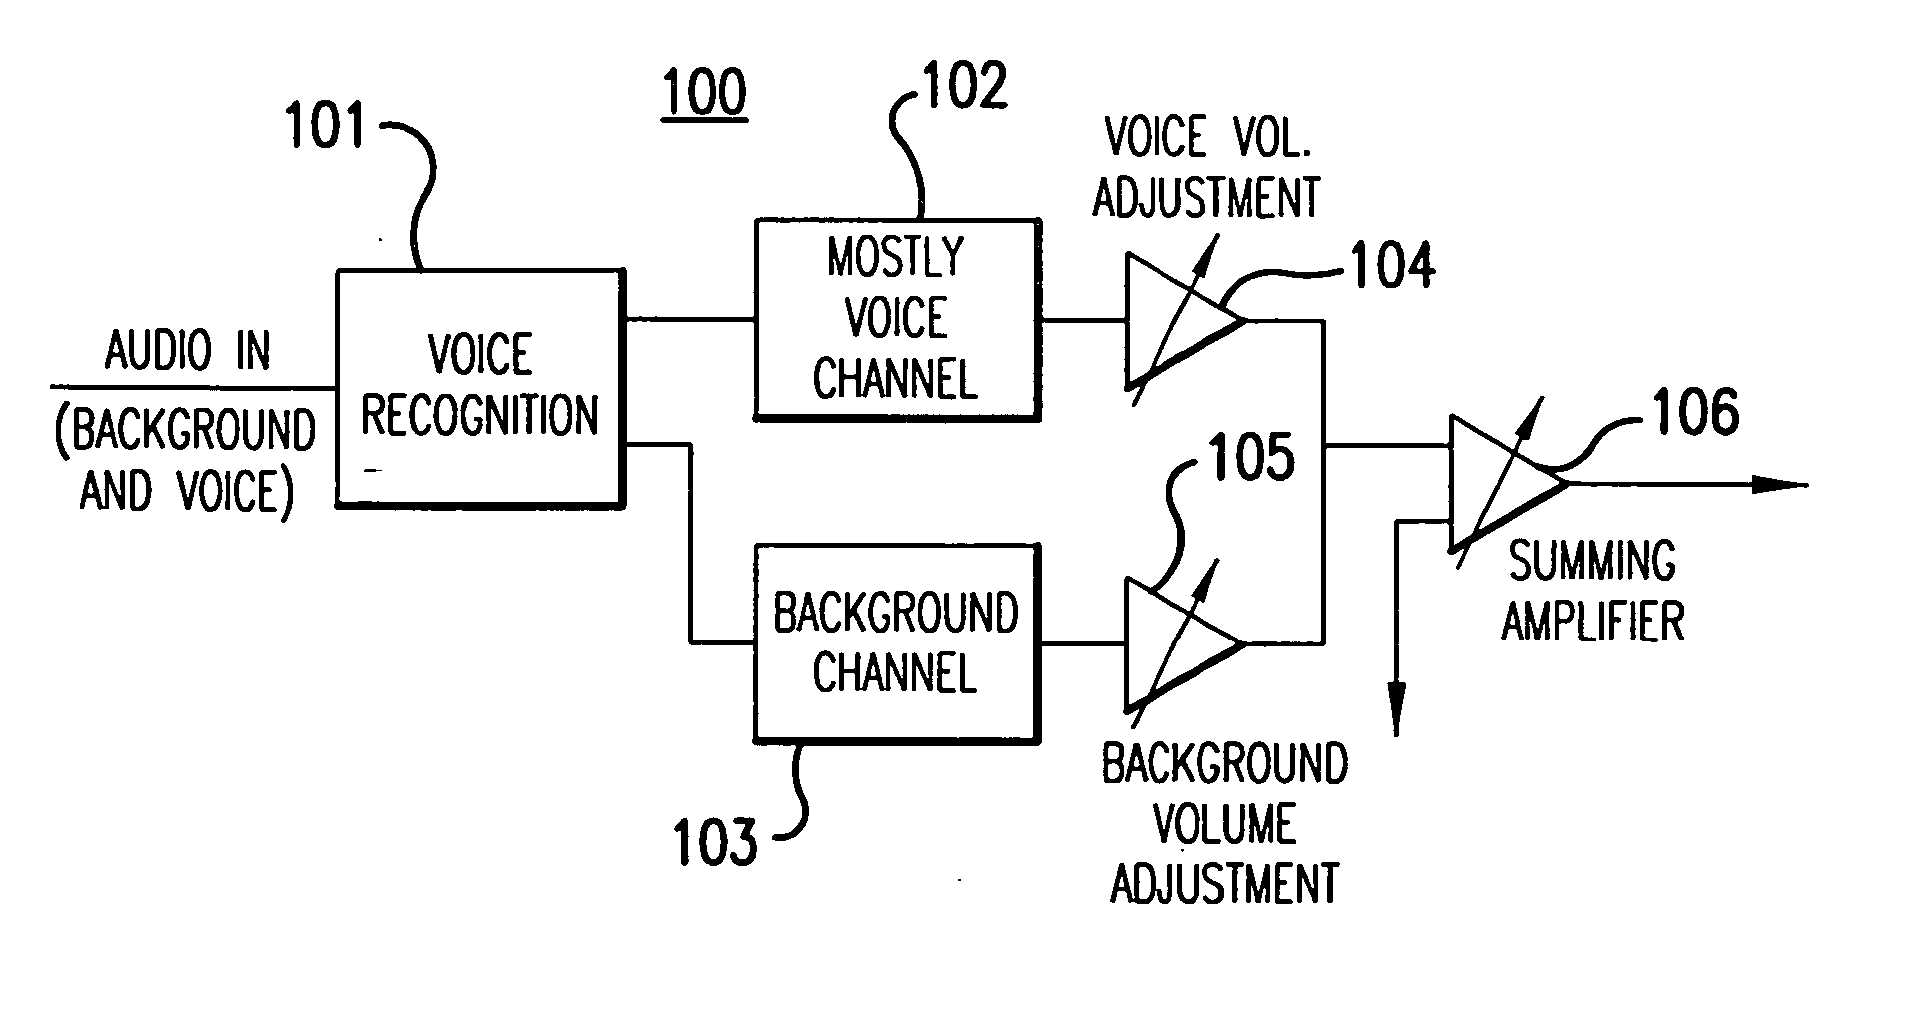 Use of voice-to-remaining audio (VRA) in consumer applications